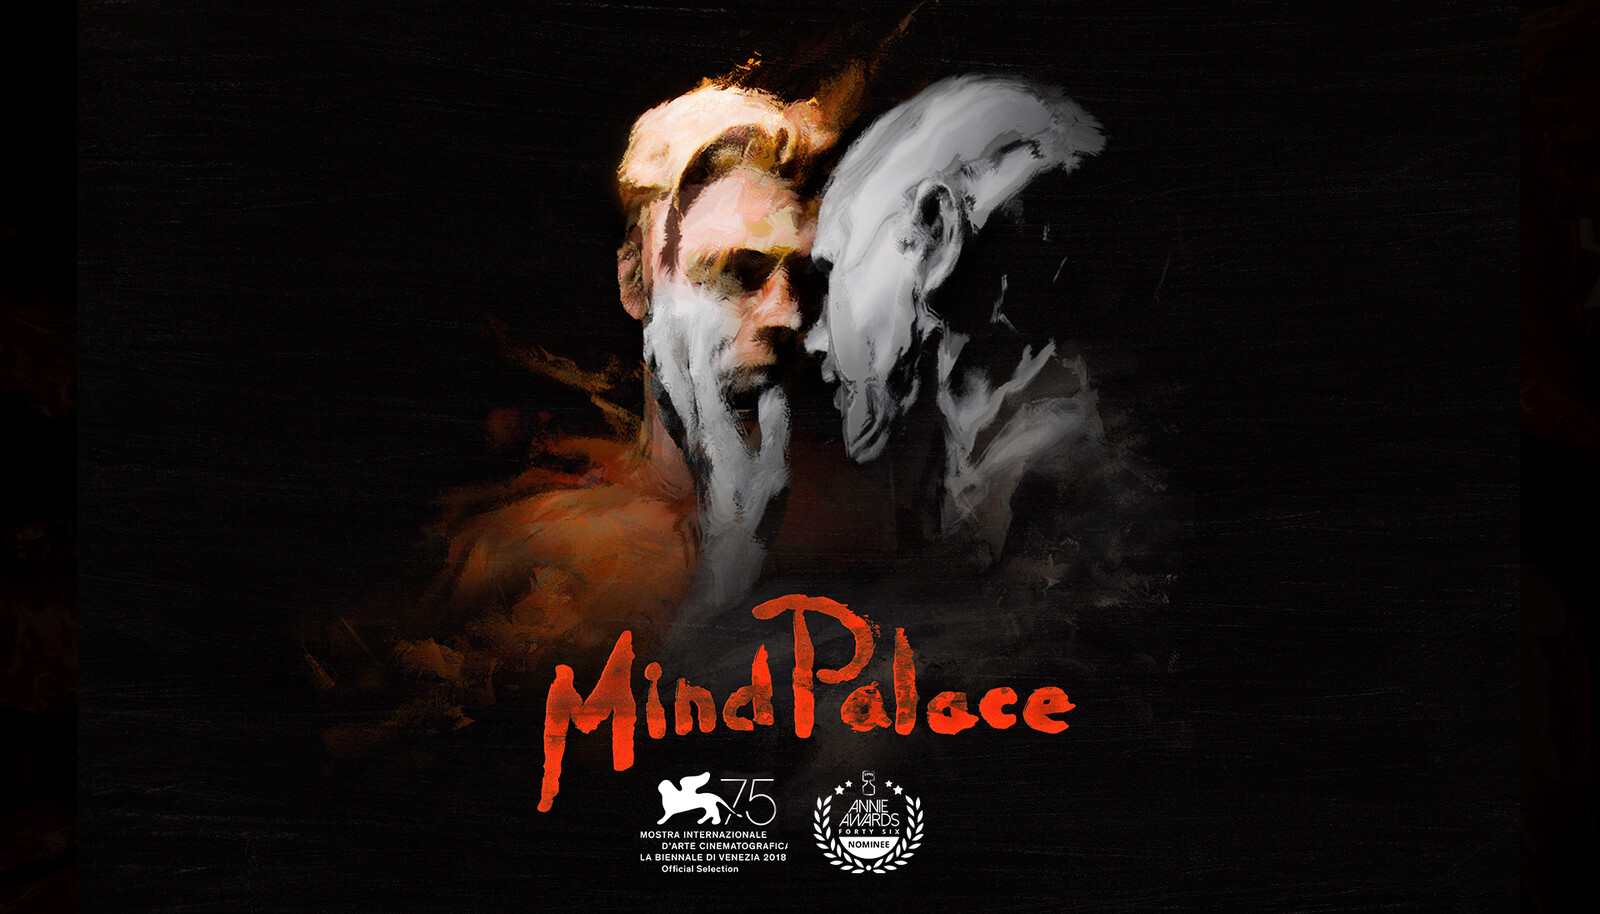 "MindPalace" VR Experience - Simulation and LookDev